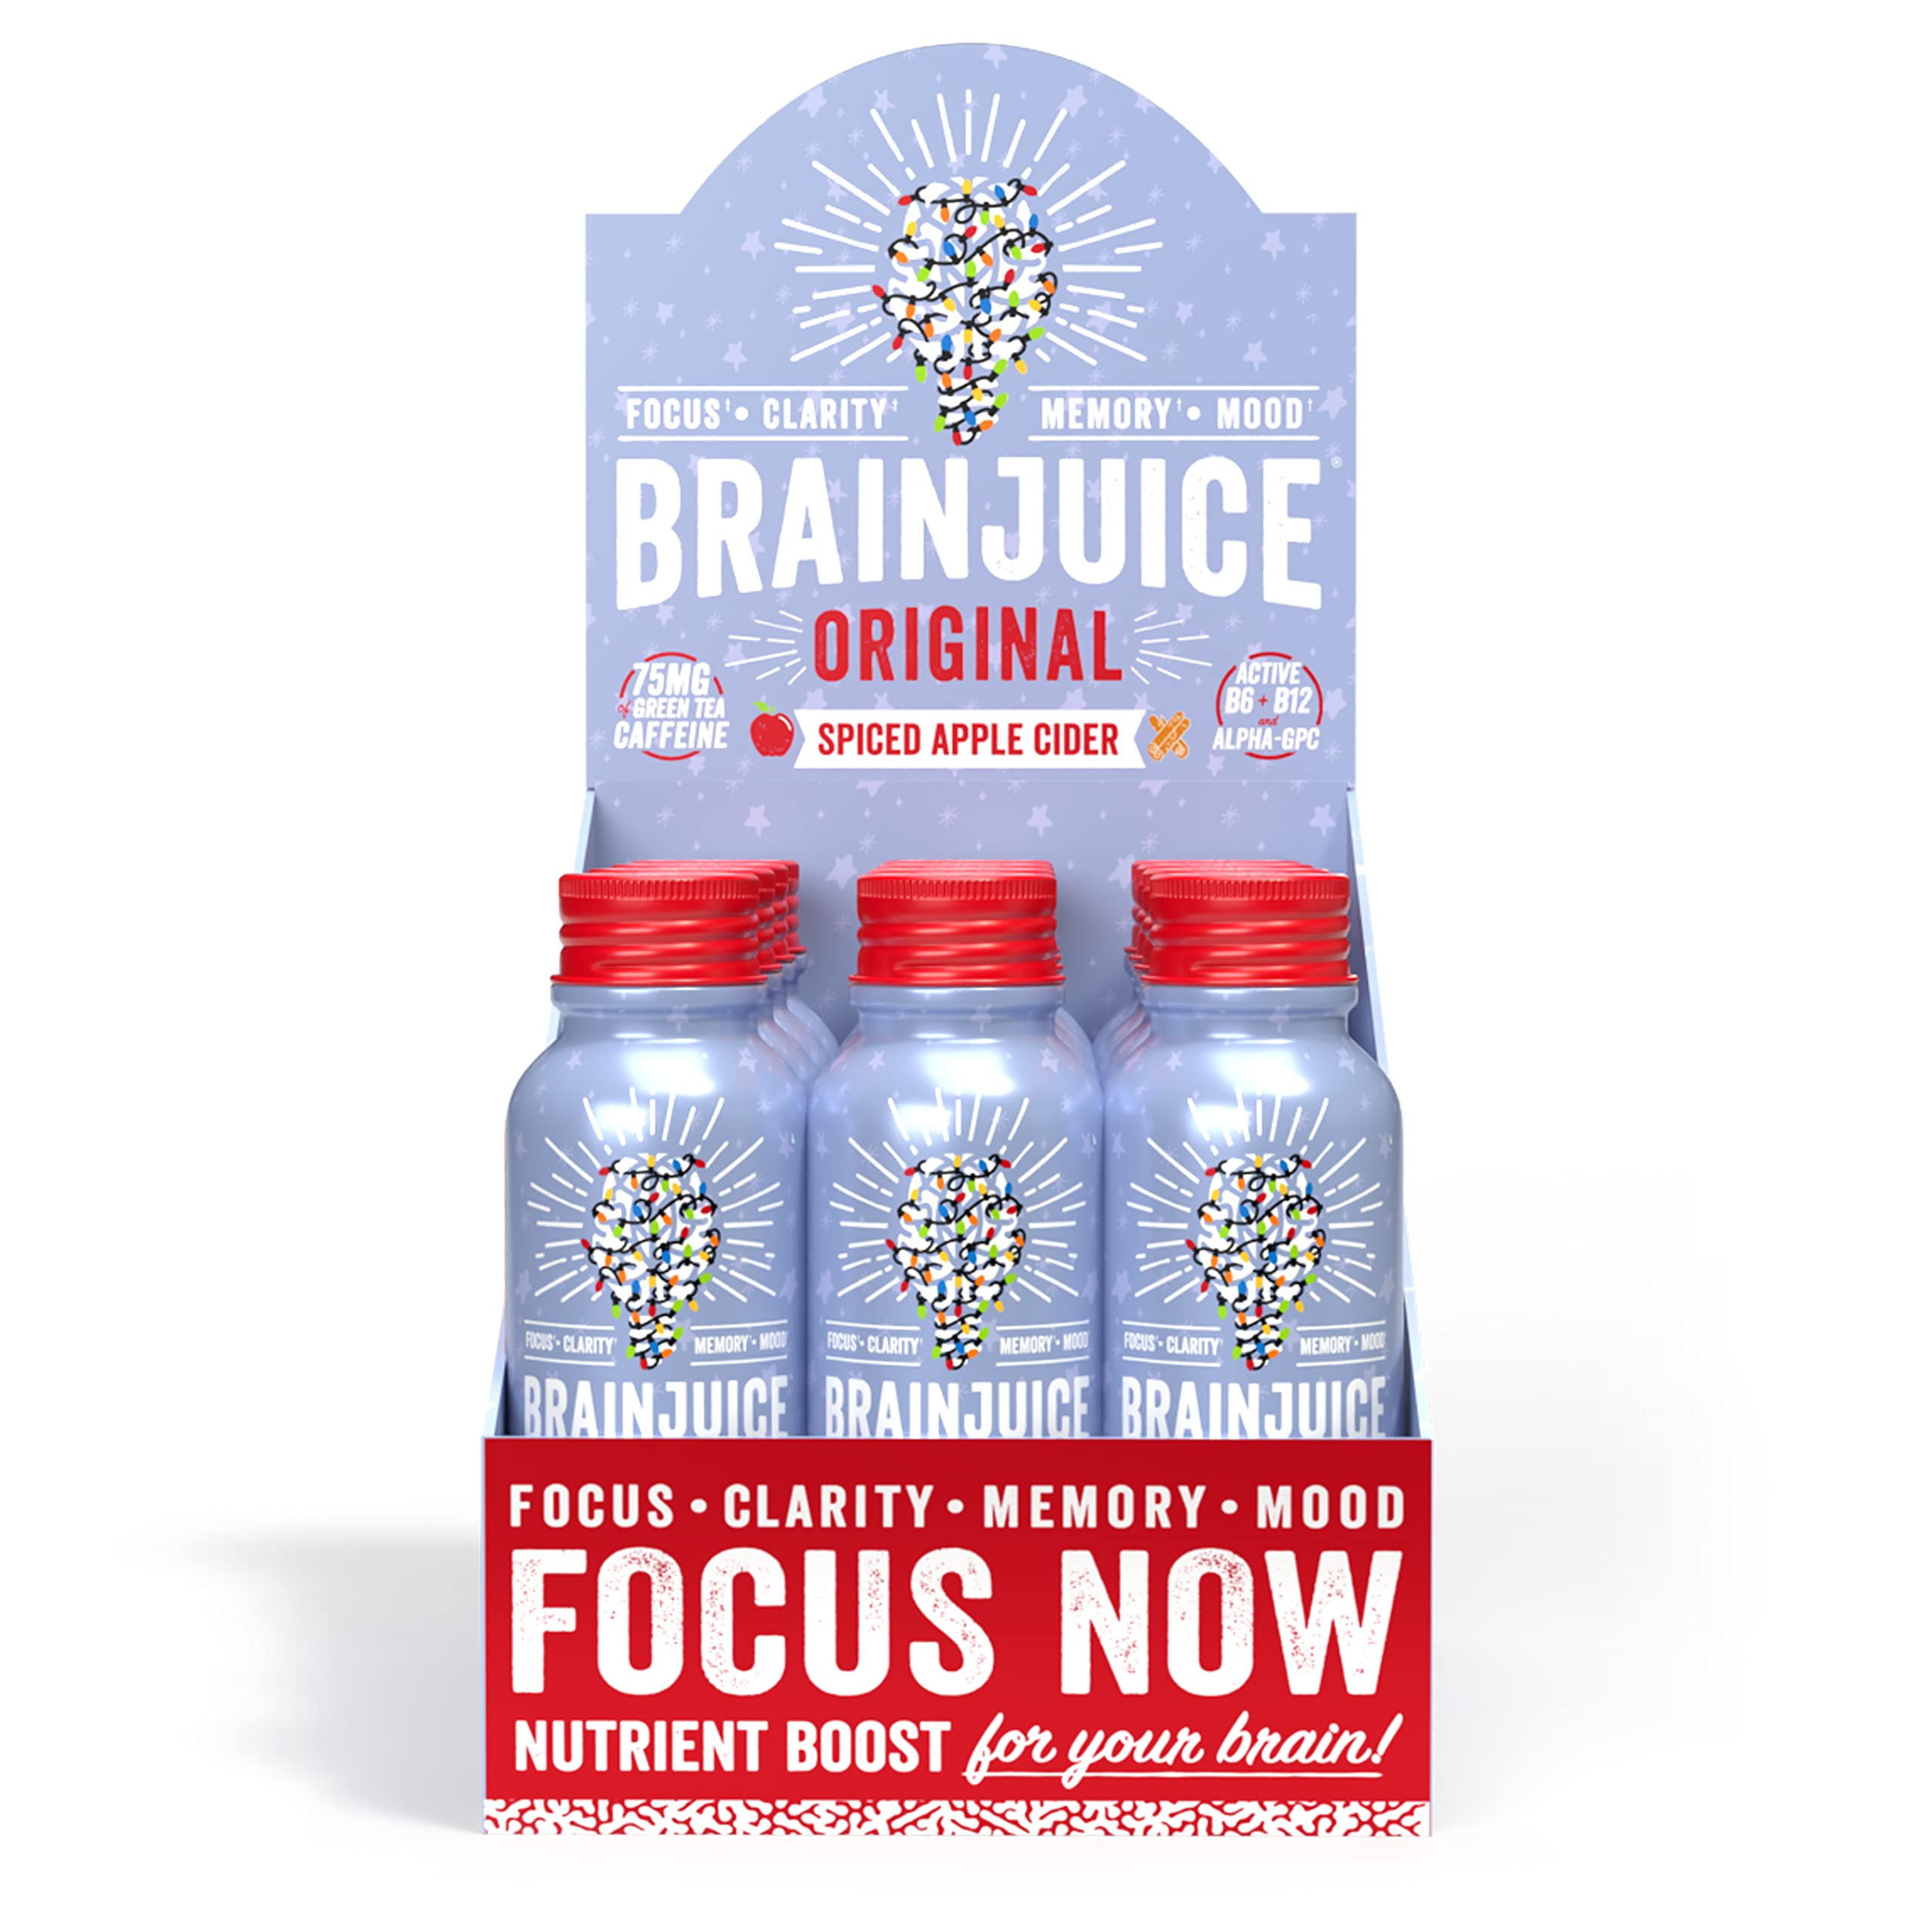 BrainJuice Brain Booster Shot, Spiced Apple Cider | Brain Support Supplement with Alpha GPC, B5, B6, B12 | Improved Energy, Memory, Focus, Clarity, & Mood | Gluten-Free, Non-GMO | 2.5 fl oz, 12 Pack